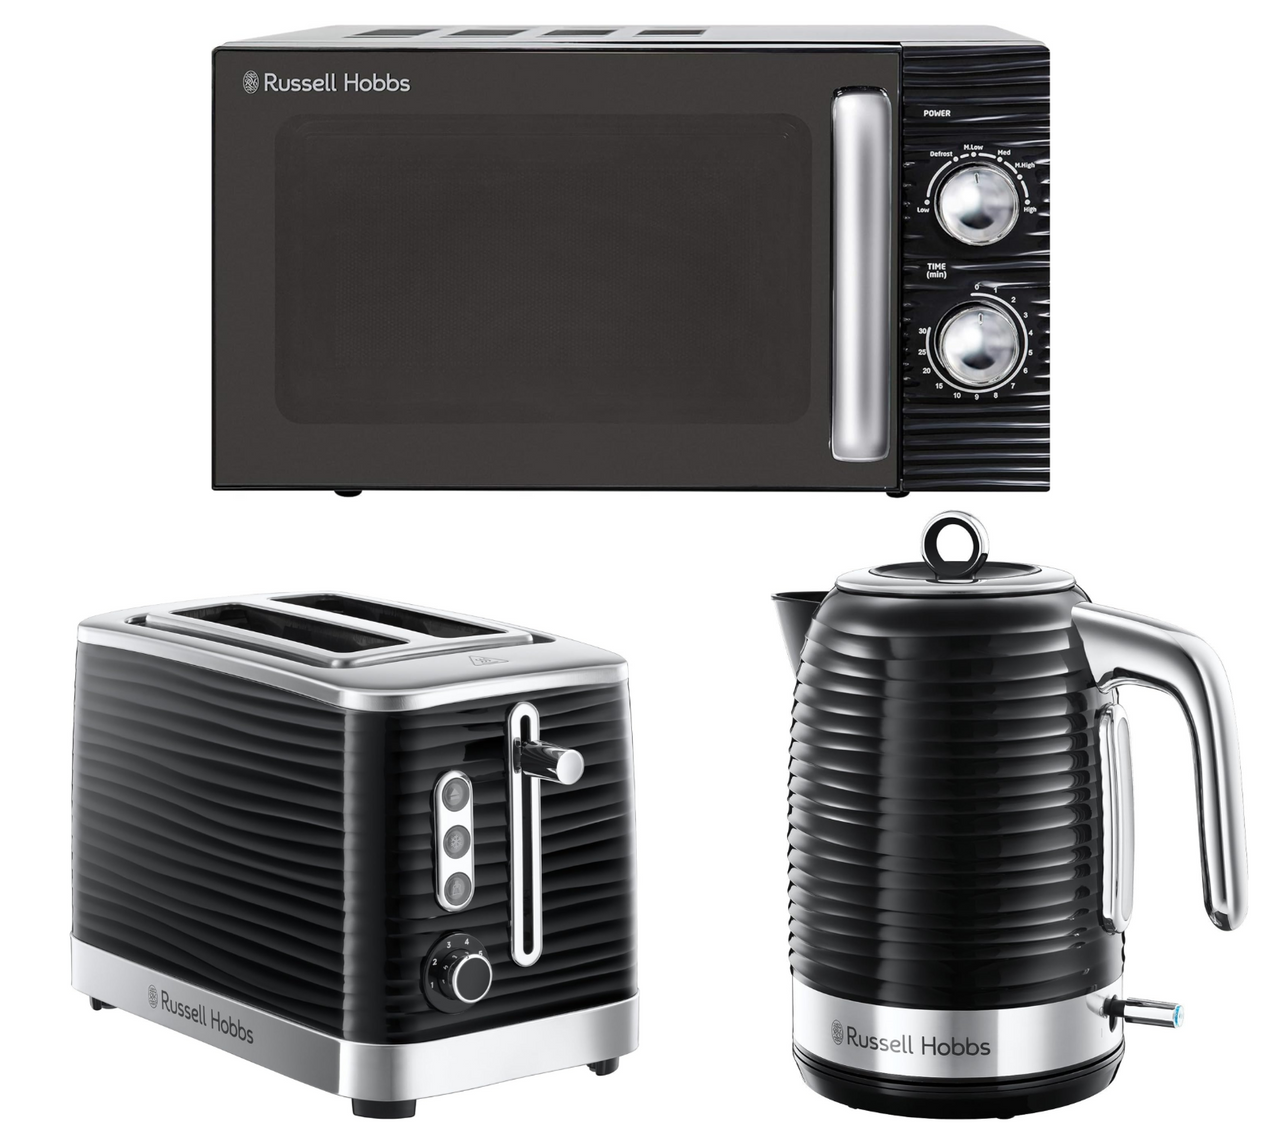 Russell Hobbs Inspire Jug Kettle, 2 Slice Toaster & 17L 700W Manual Microwave Matching Kitchen Set in Black with Chrome